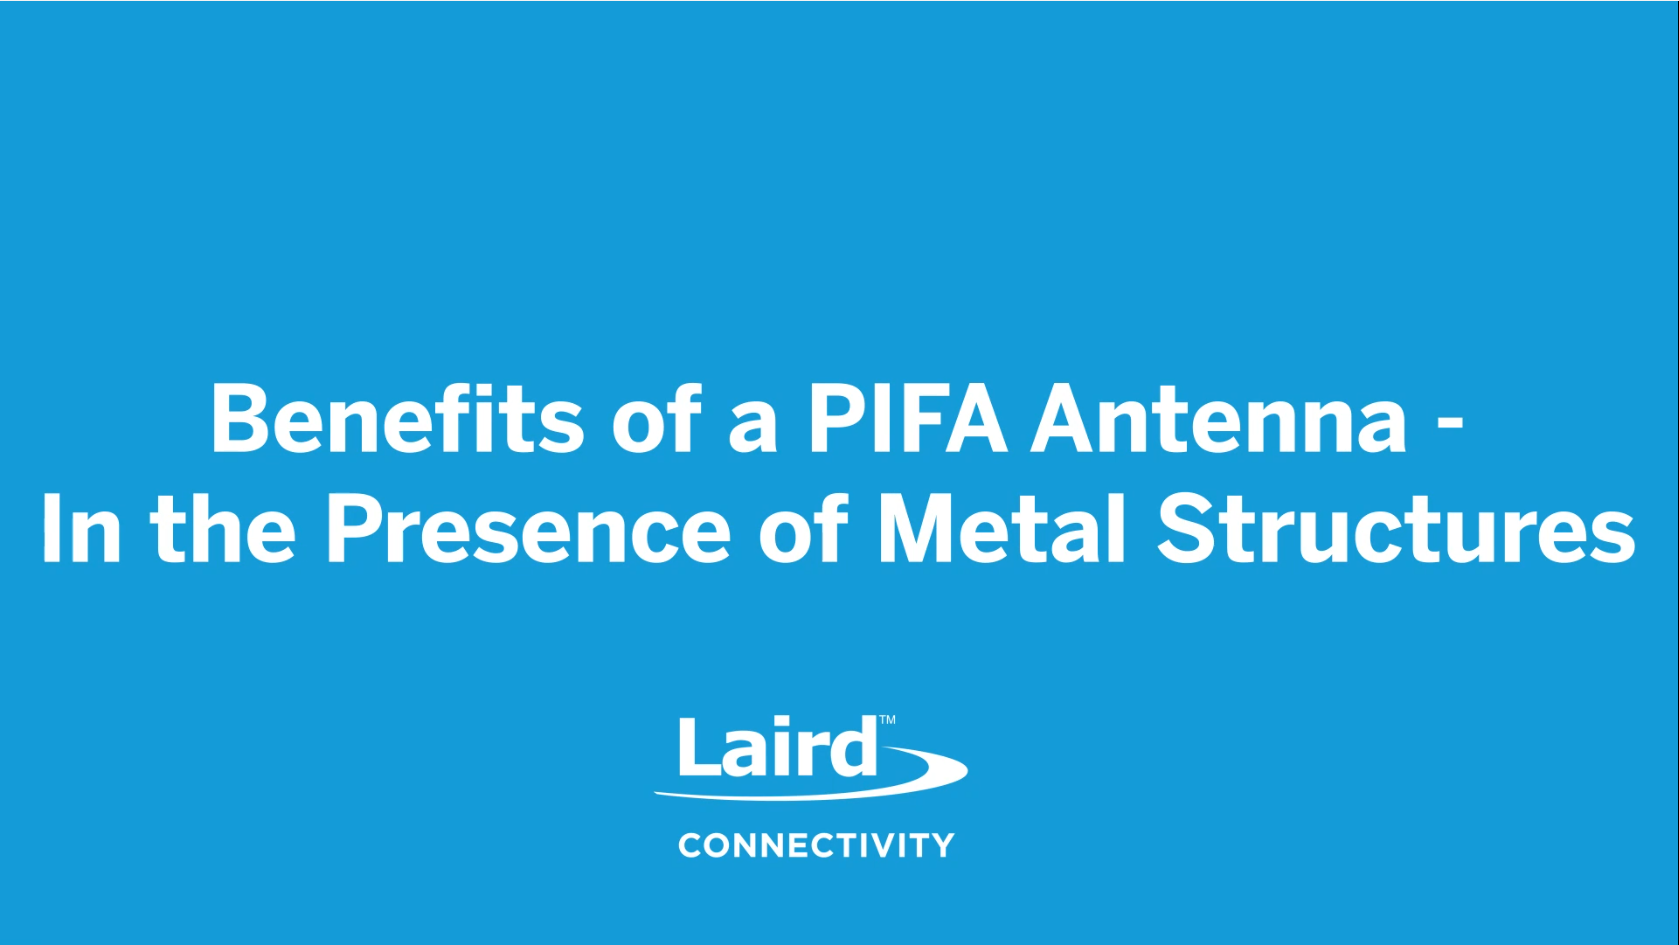 Benefits of a PIFA - In the Presence of Metal Structures